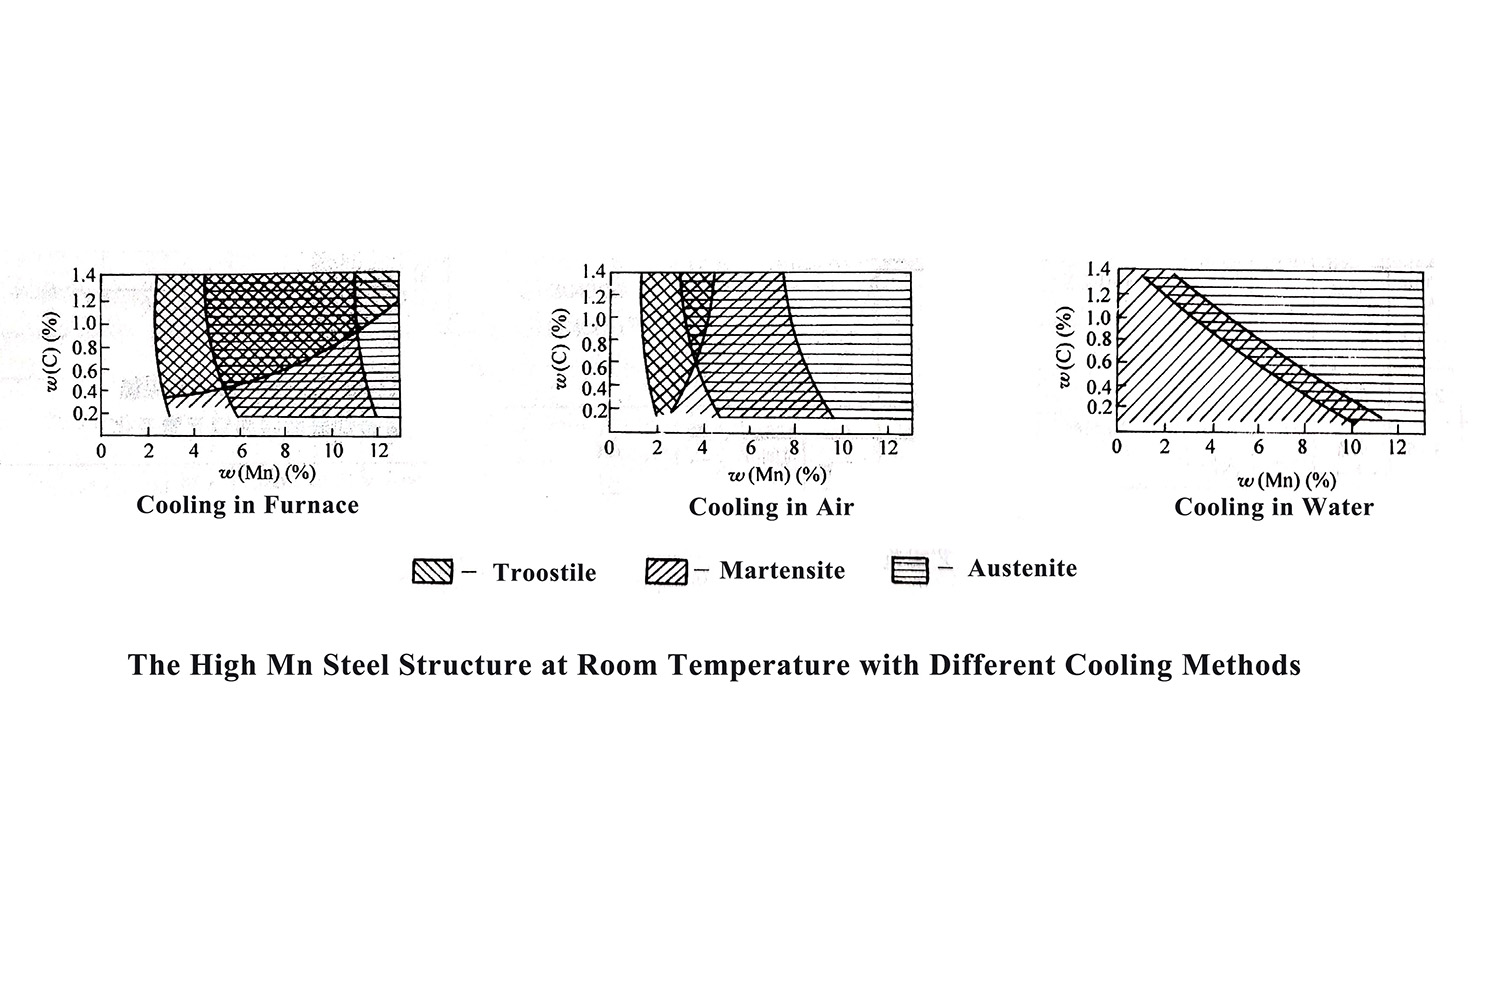 The High Mn Steel Structure at Room Temperature with different cooling Methods